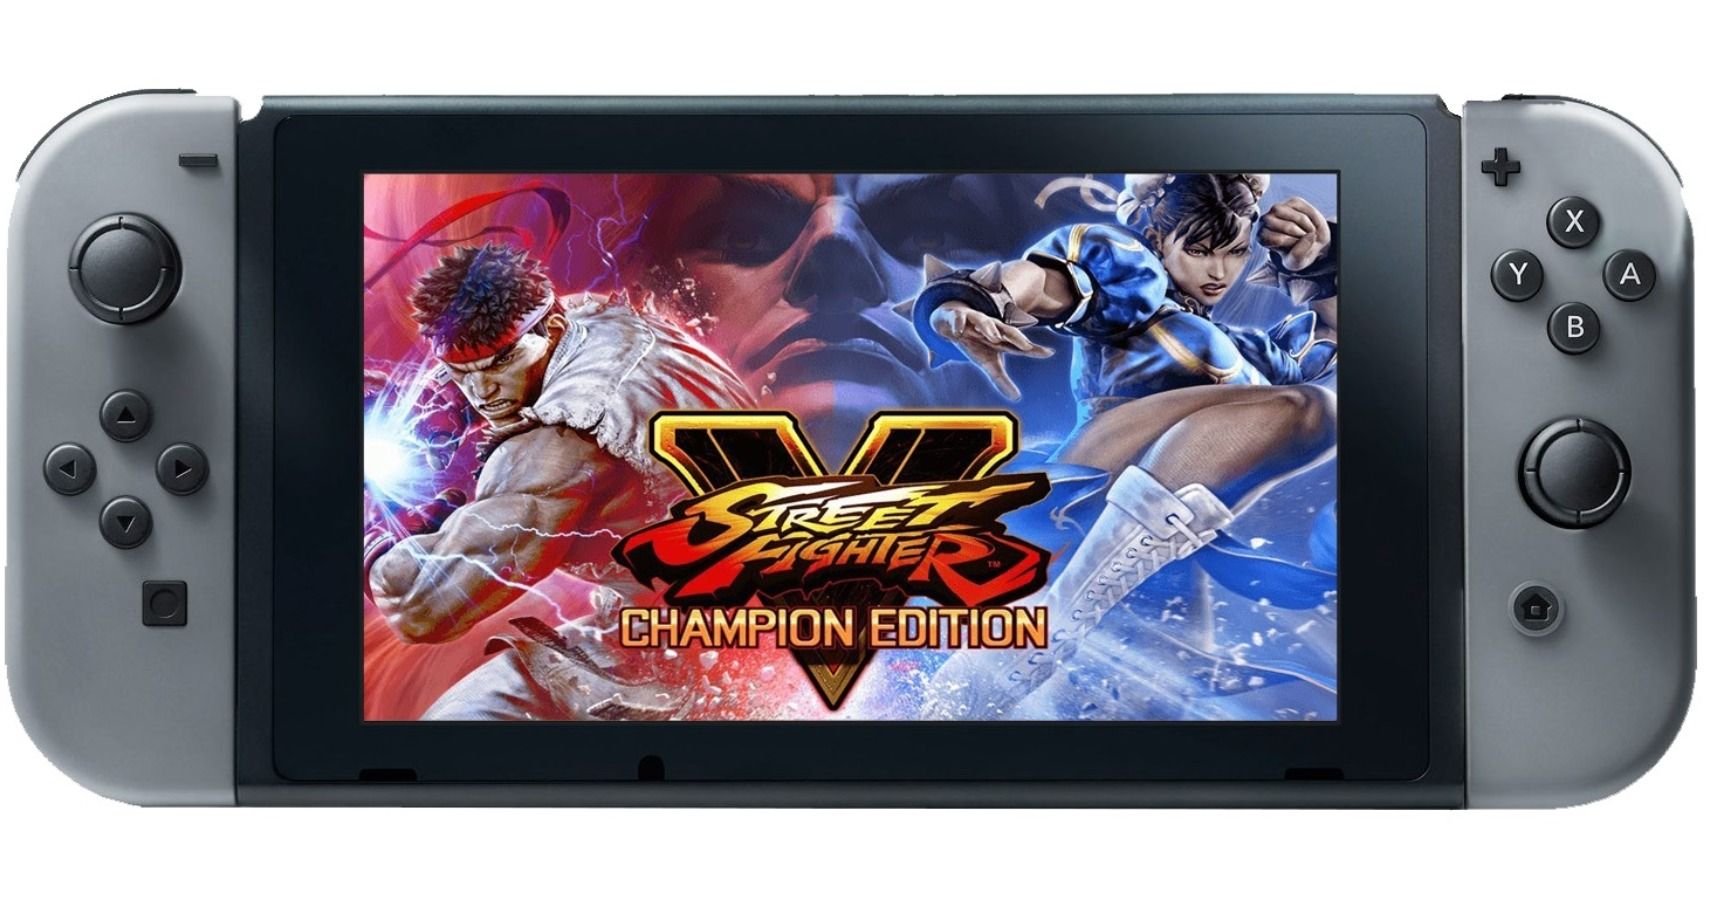 EB Games Canada Accidentally Leaks Street Fighter V For The Nintendo Switch